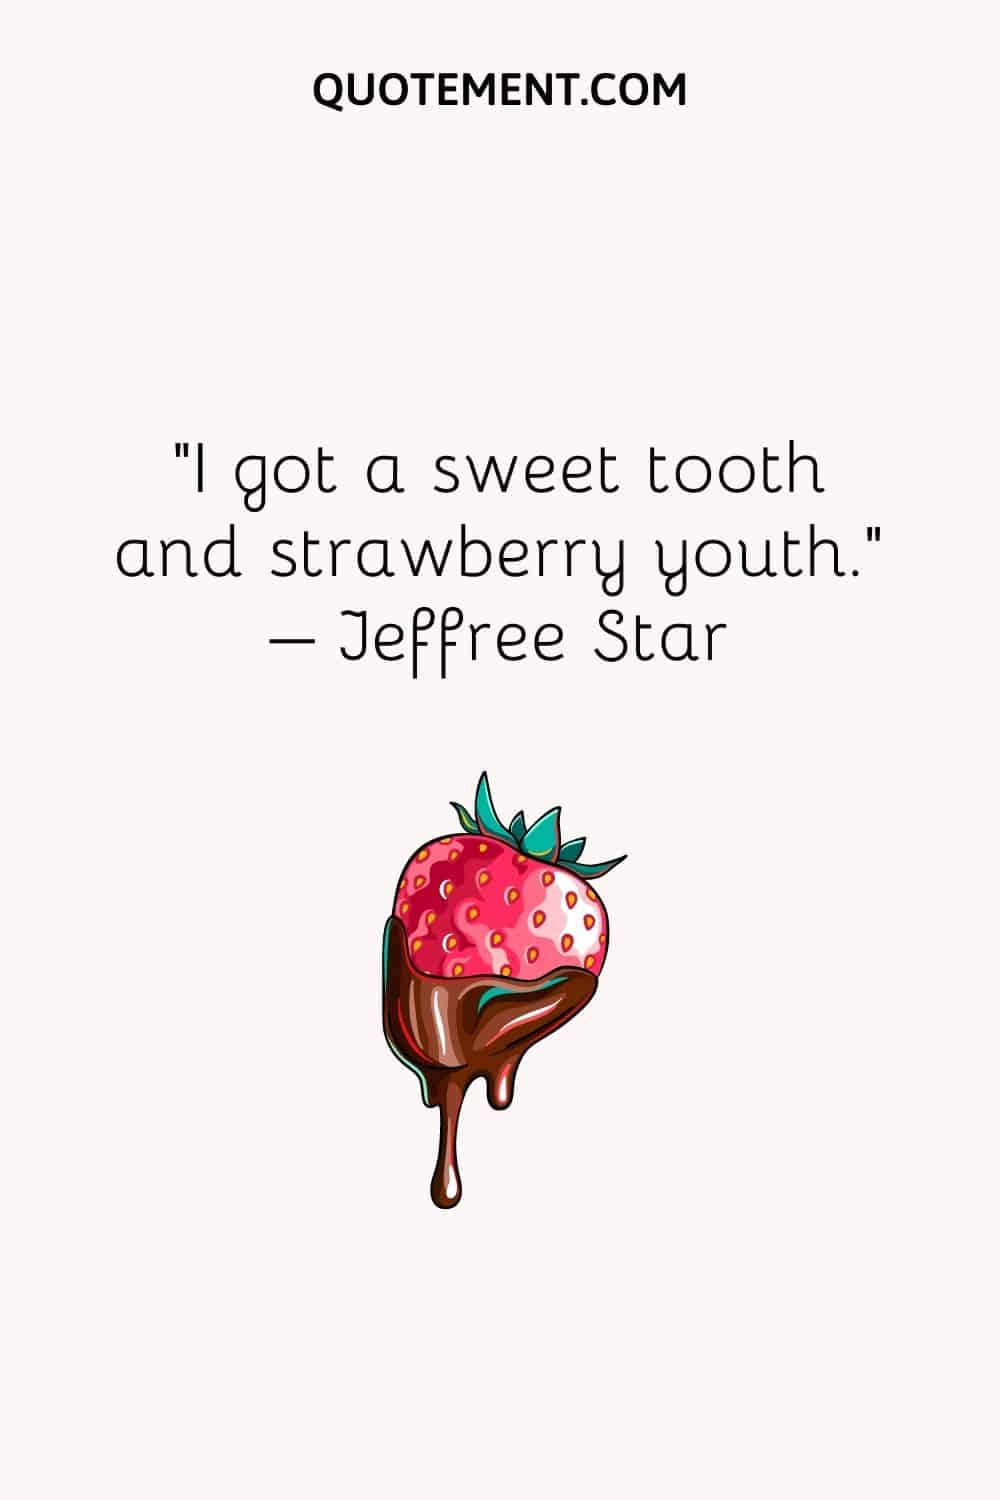 I got a sweet tooth and strawberry youth